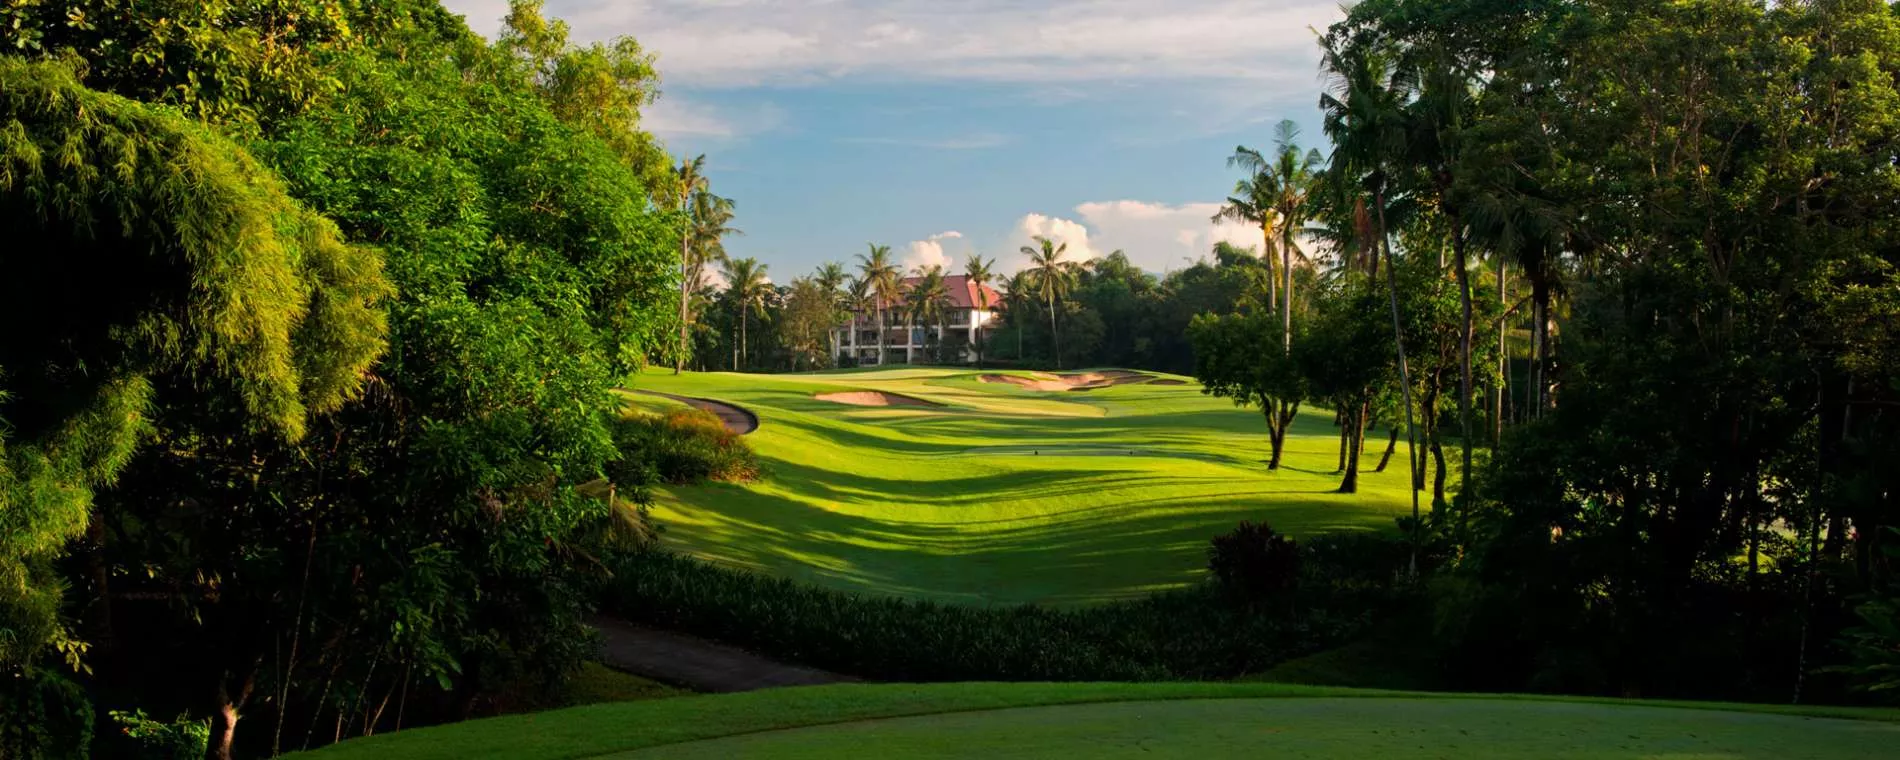 Bali National Golf Club in Indonesia, Central Asia | Golf - Rated 4